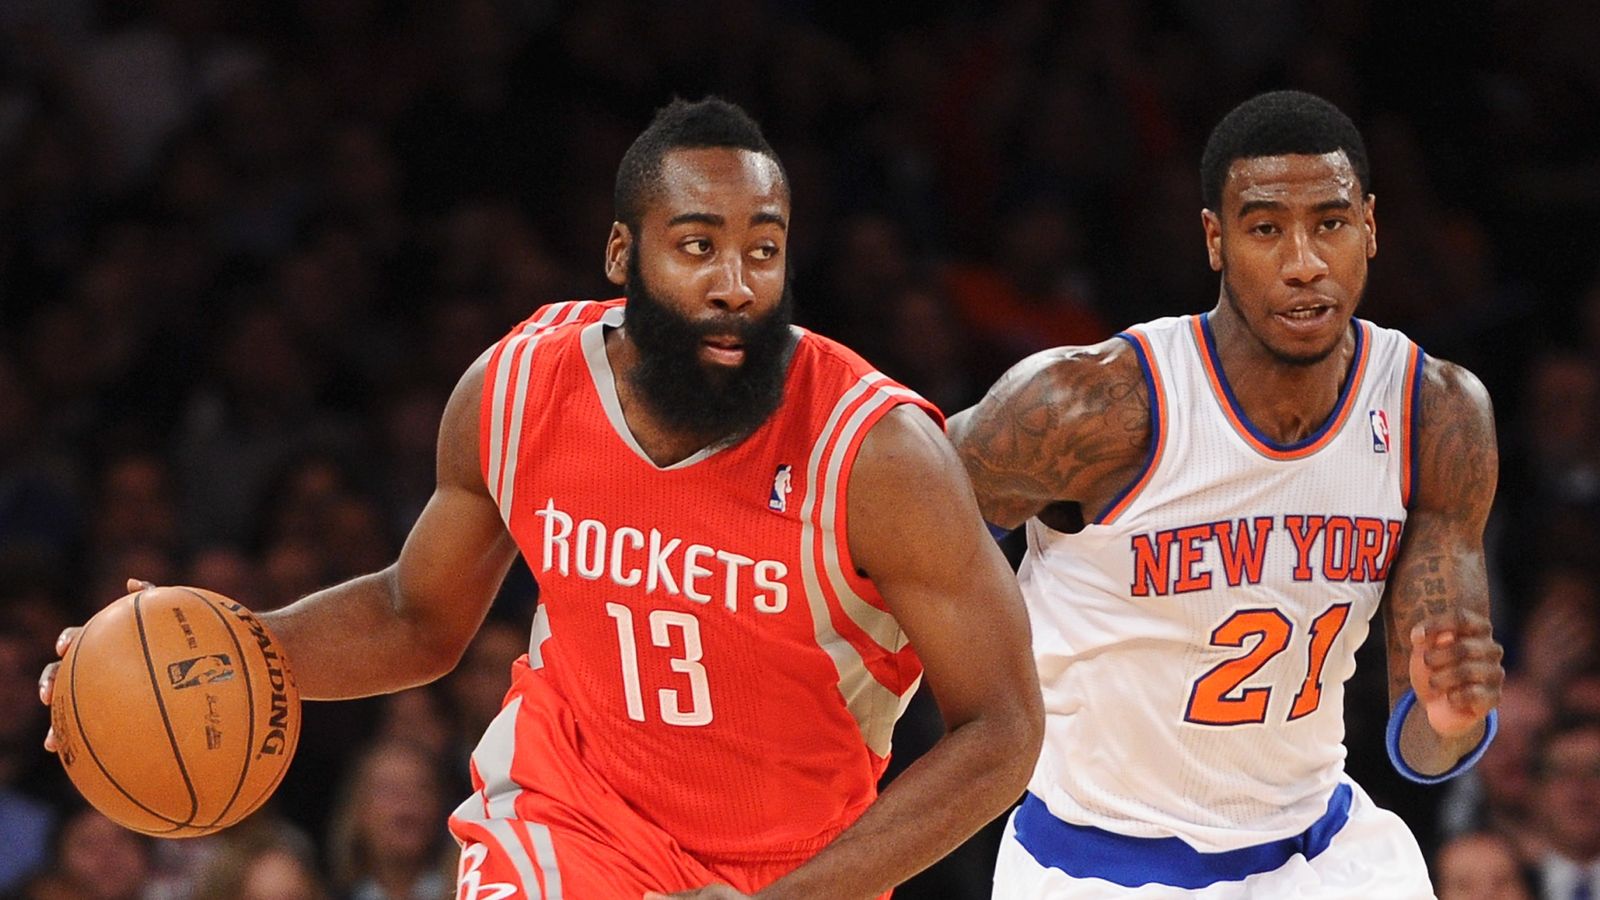 NBA: Houston Rockets inflict more misery on the New York Knicks | Basketball News ...